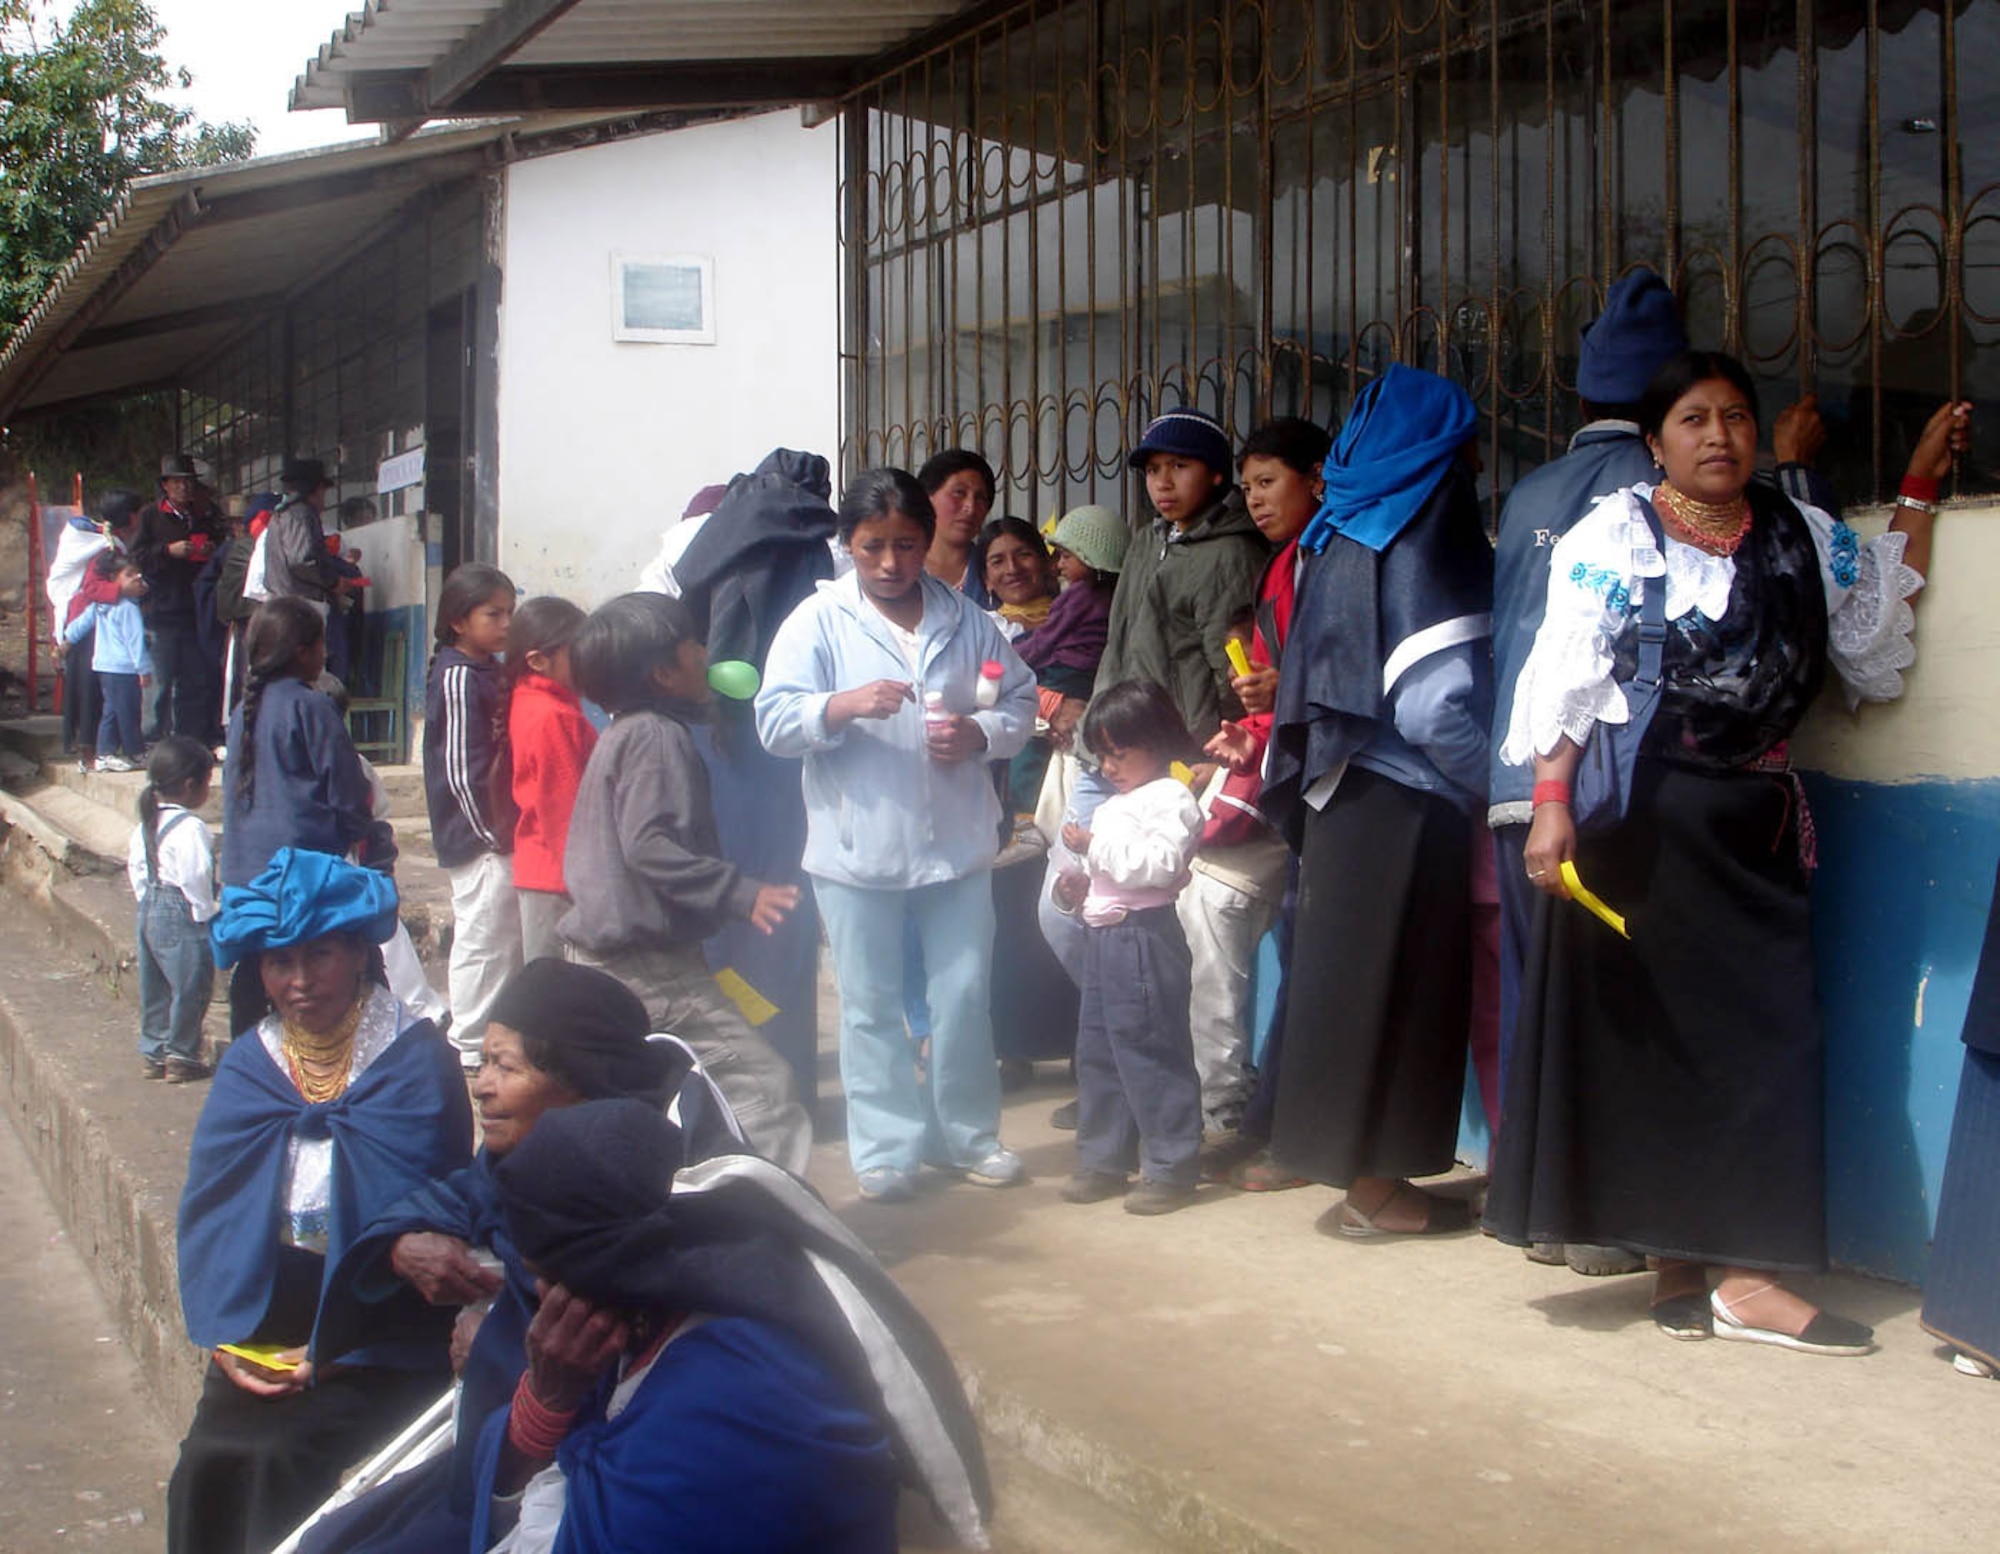 OTAVALO, Ecuador (AFPN) -- A group of Ecuadorian Indians wait in line to visit the dental clinic Feb. 7. Air Force teams from the U.S. and Ecuador treated more than 7,000 patients during the 10-day medical readiness exercise that ended Feb. 9. (U.S. Air Force photo by Capt. Kim Melchor) 
